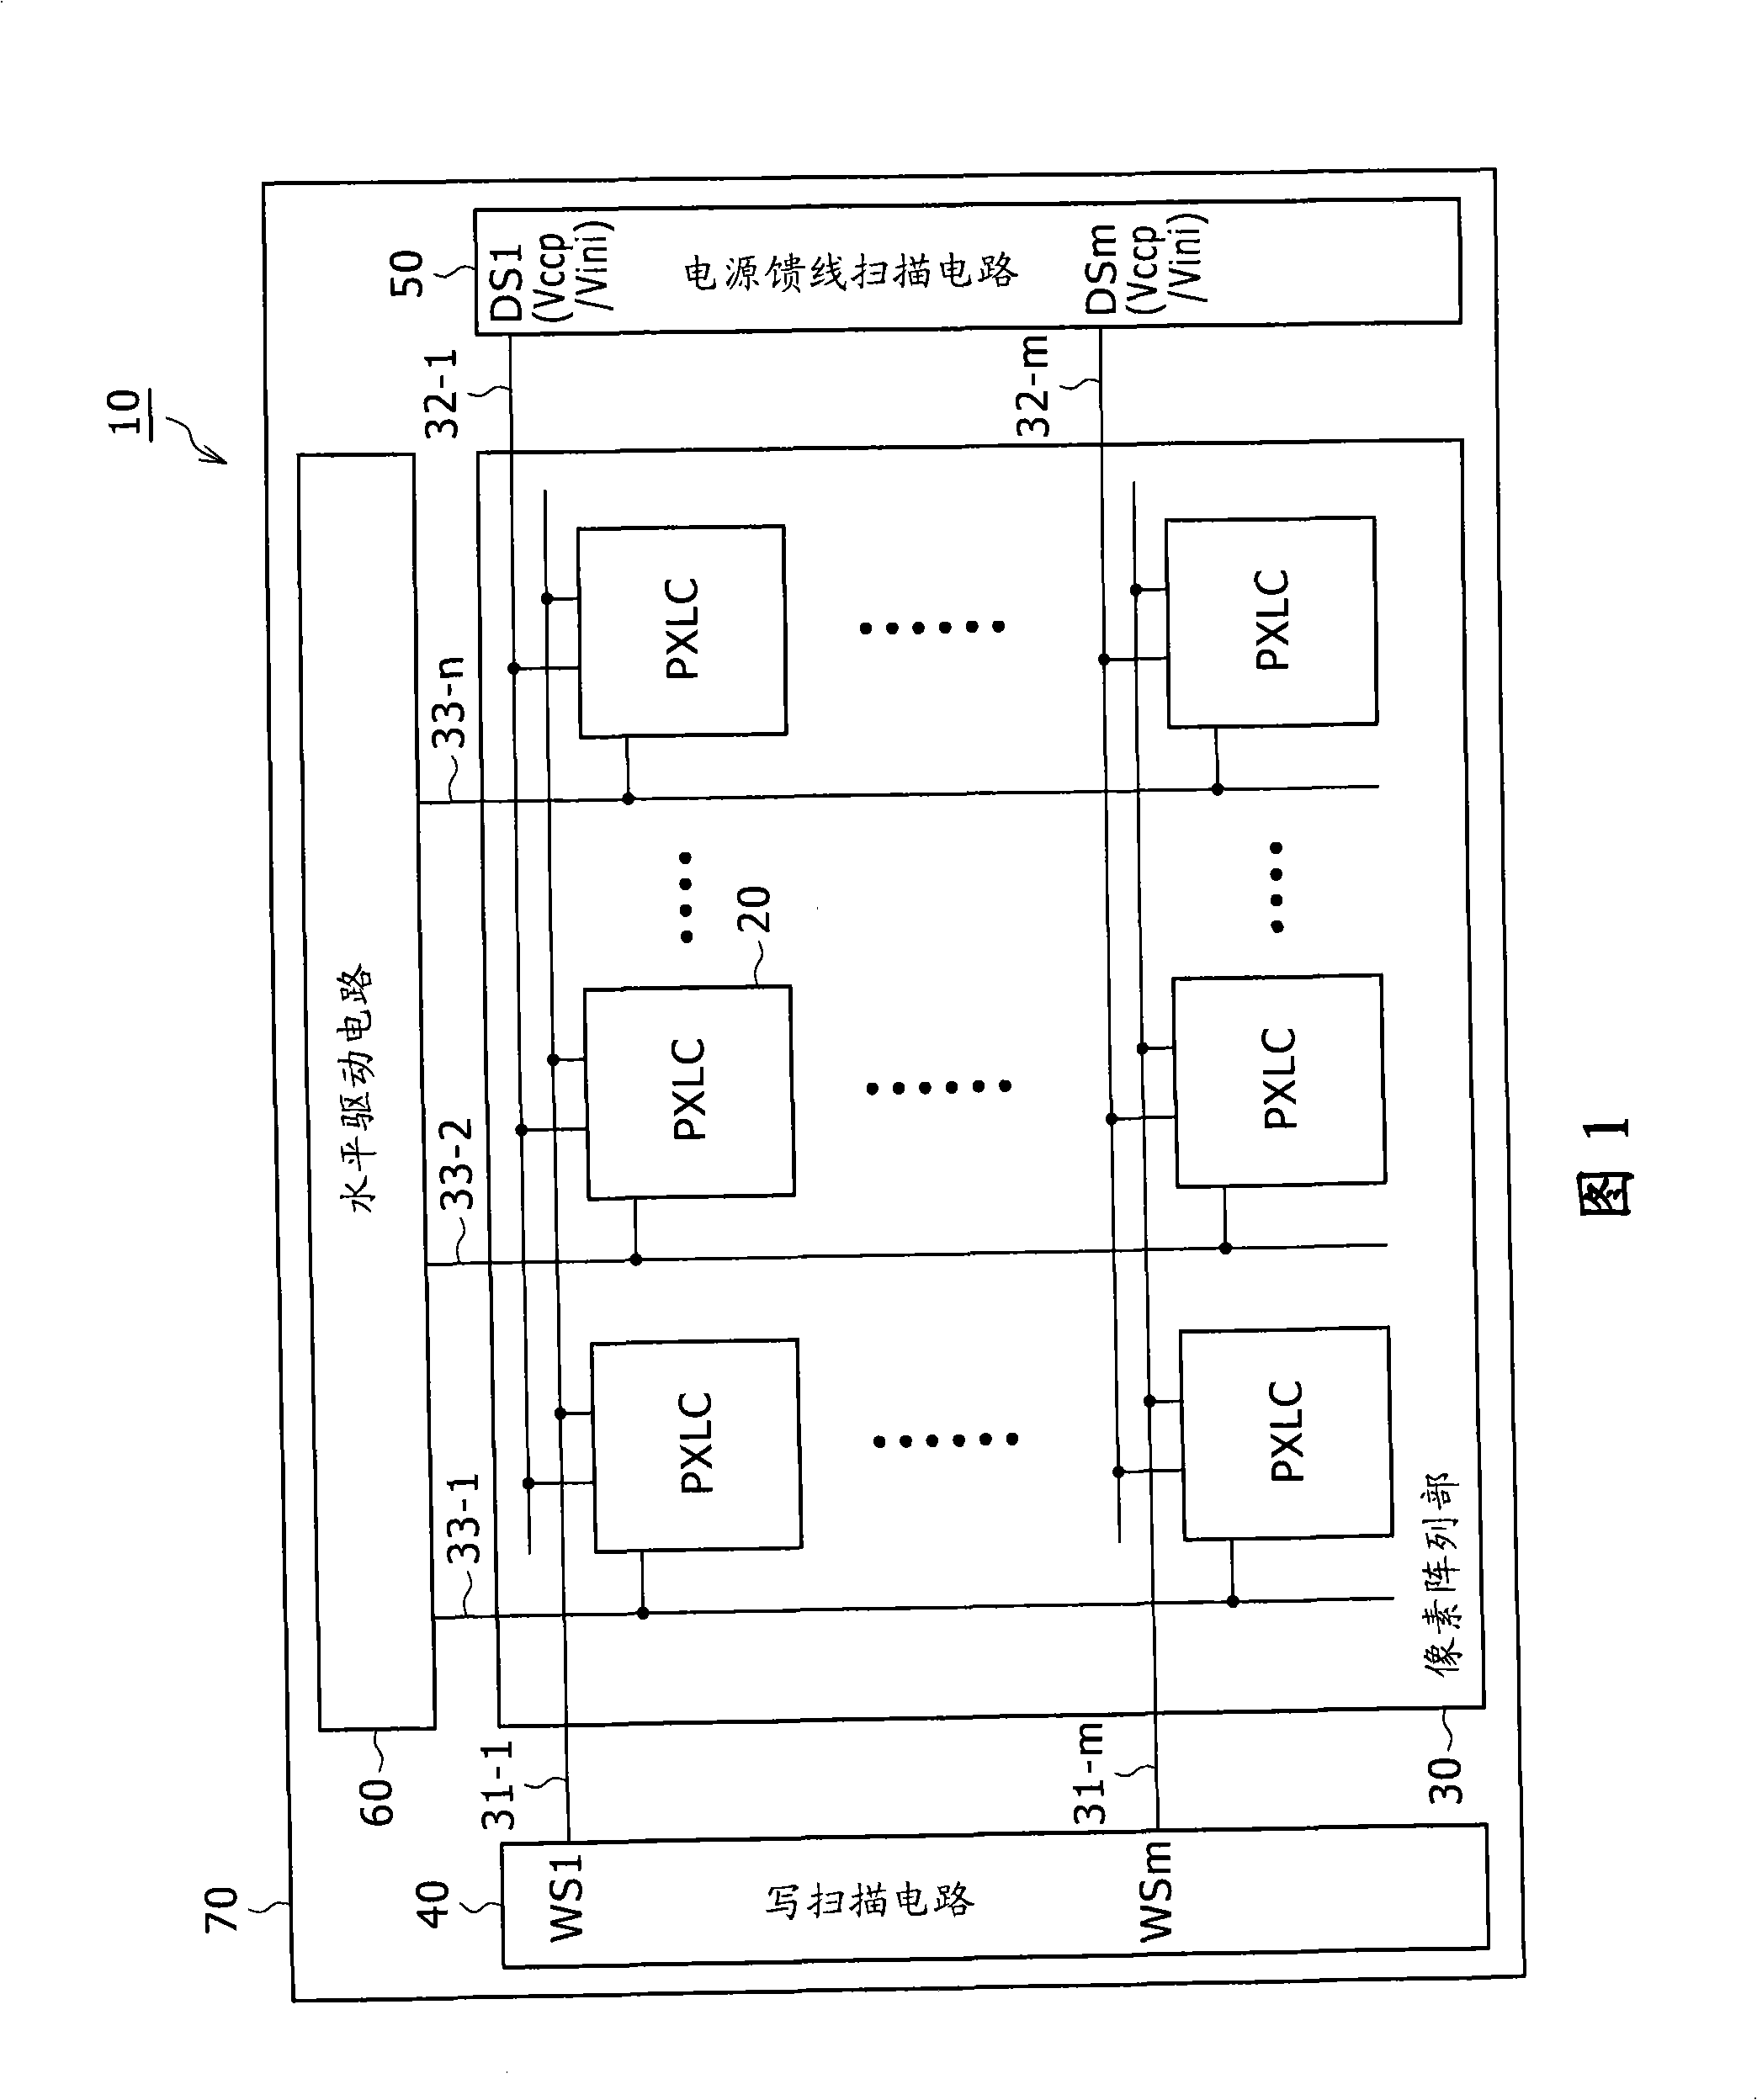 Display apparatus, display apparatus driving method and electronic equipment